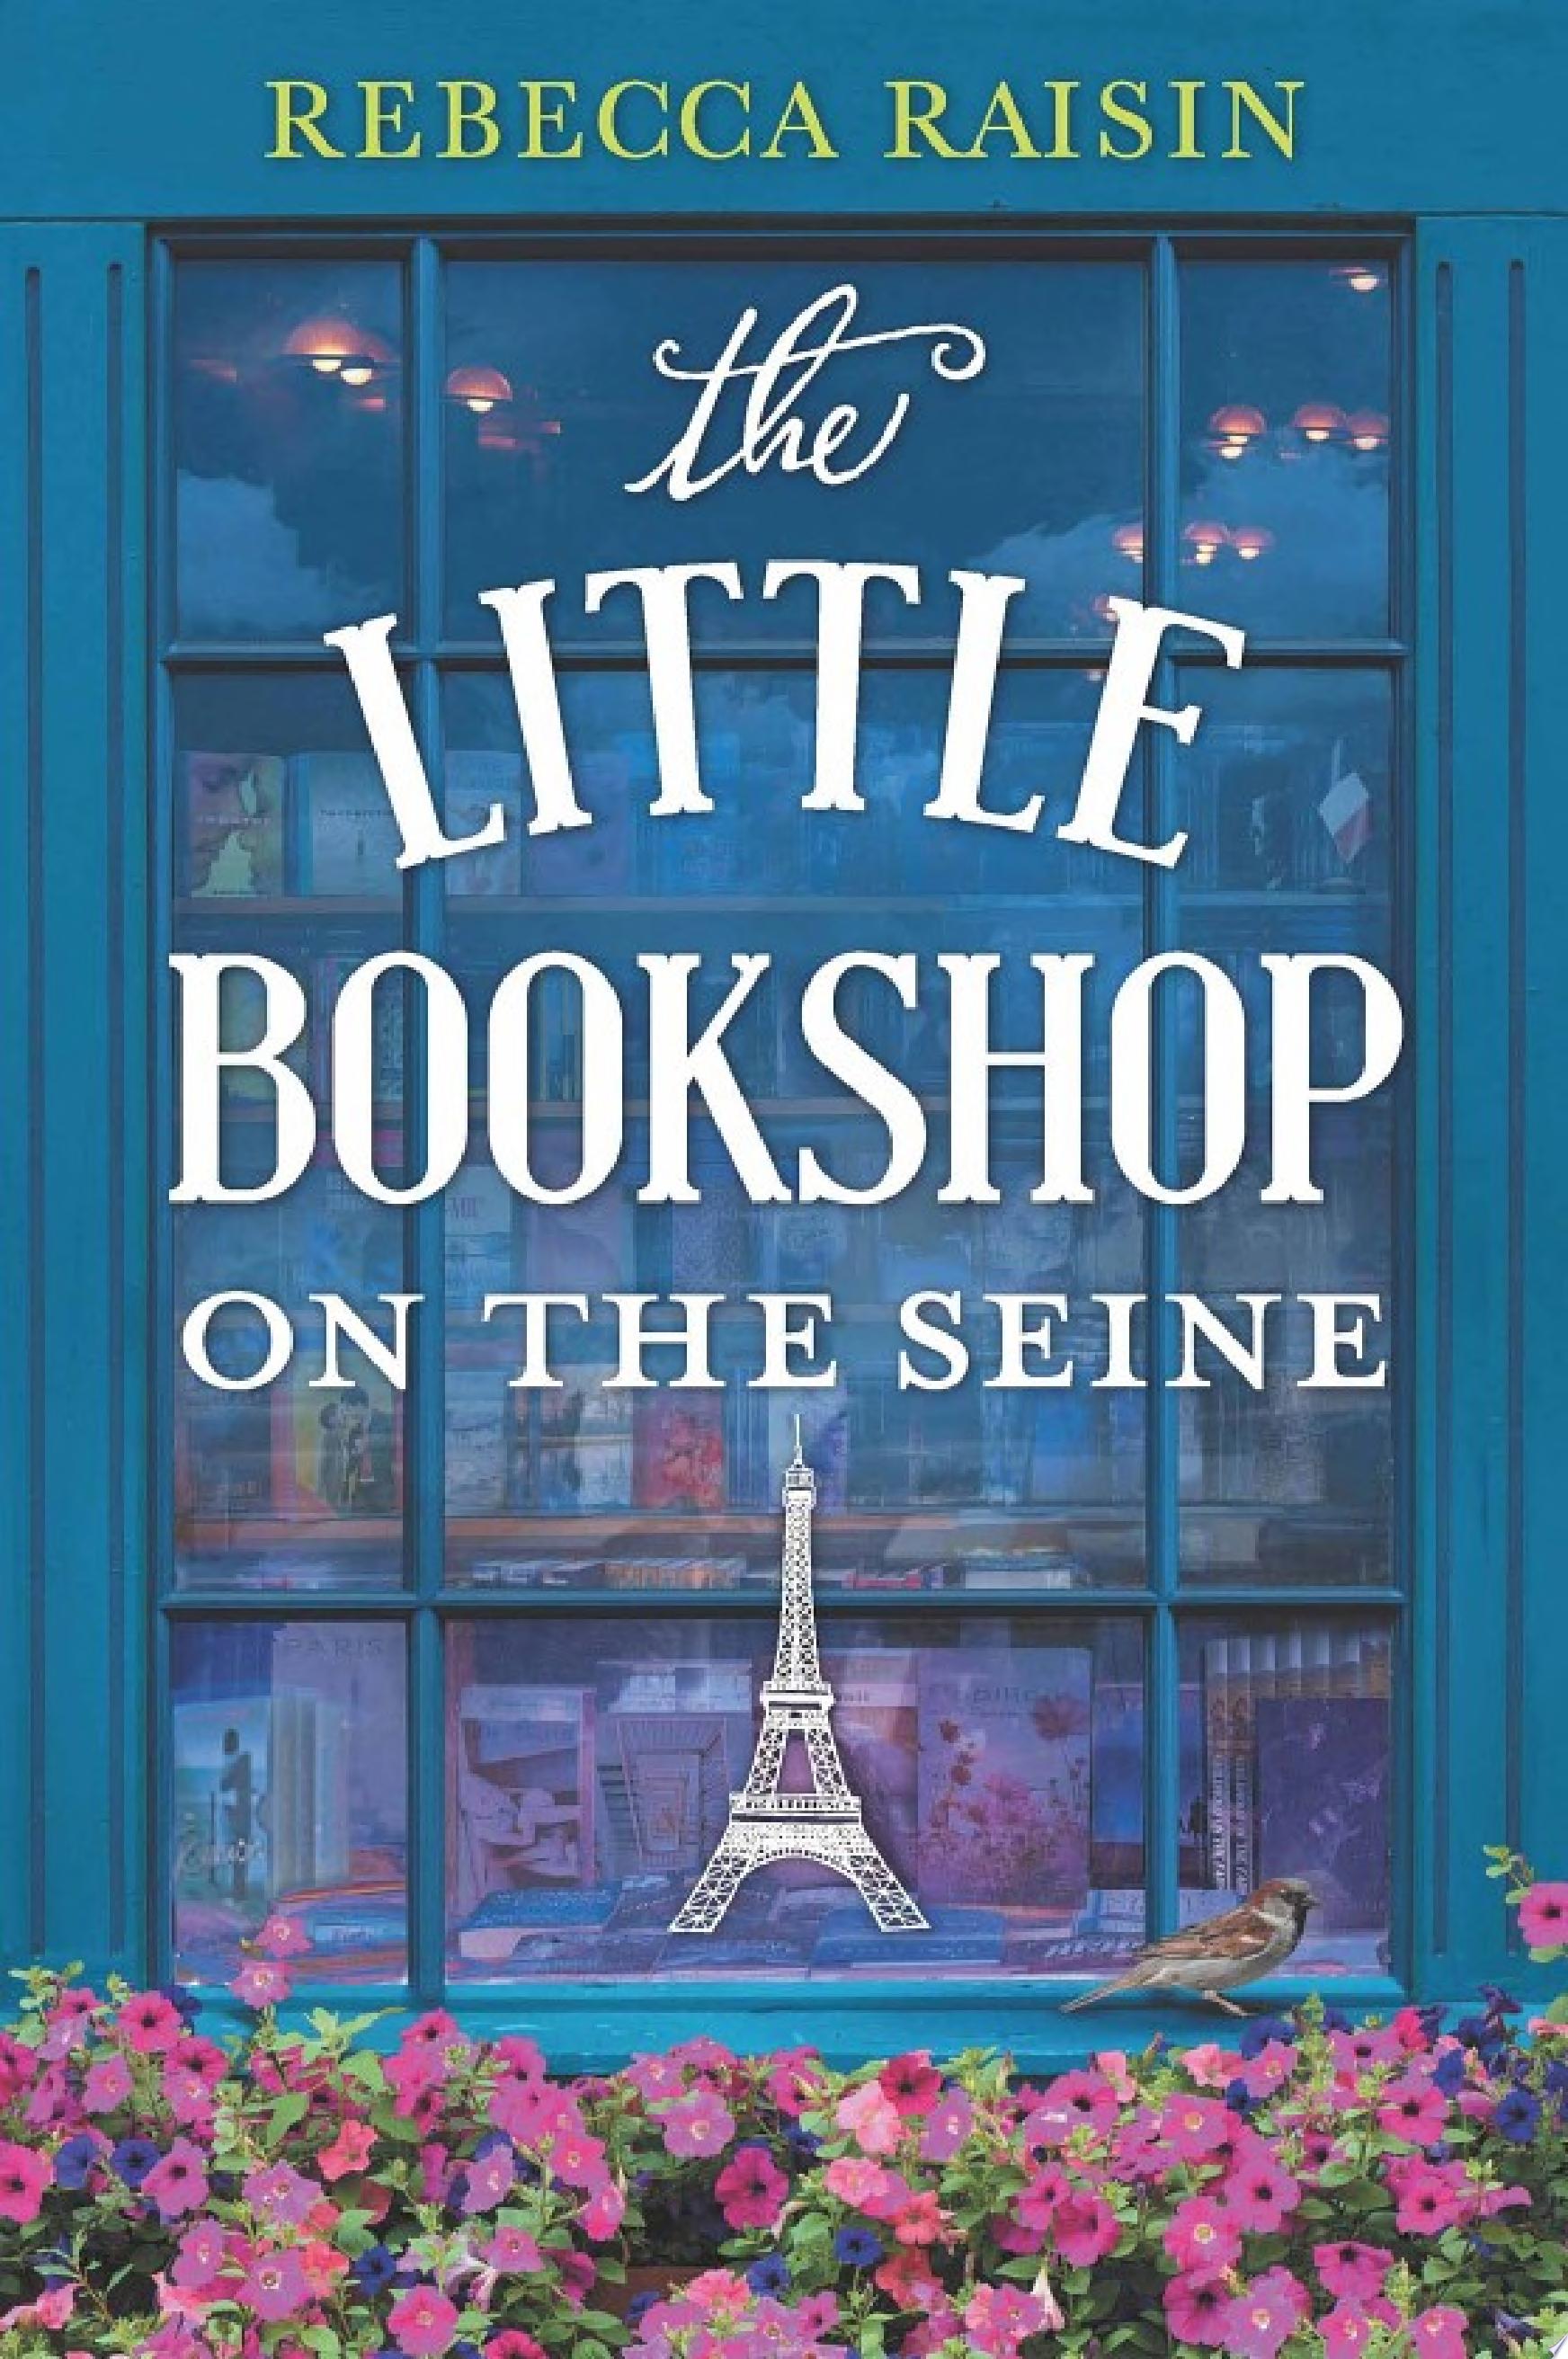 Image for "The Little Bookshop on the Seine"